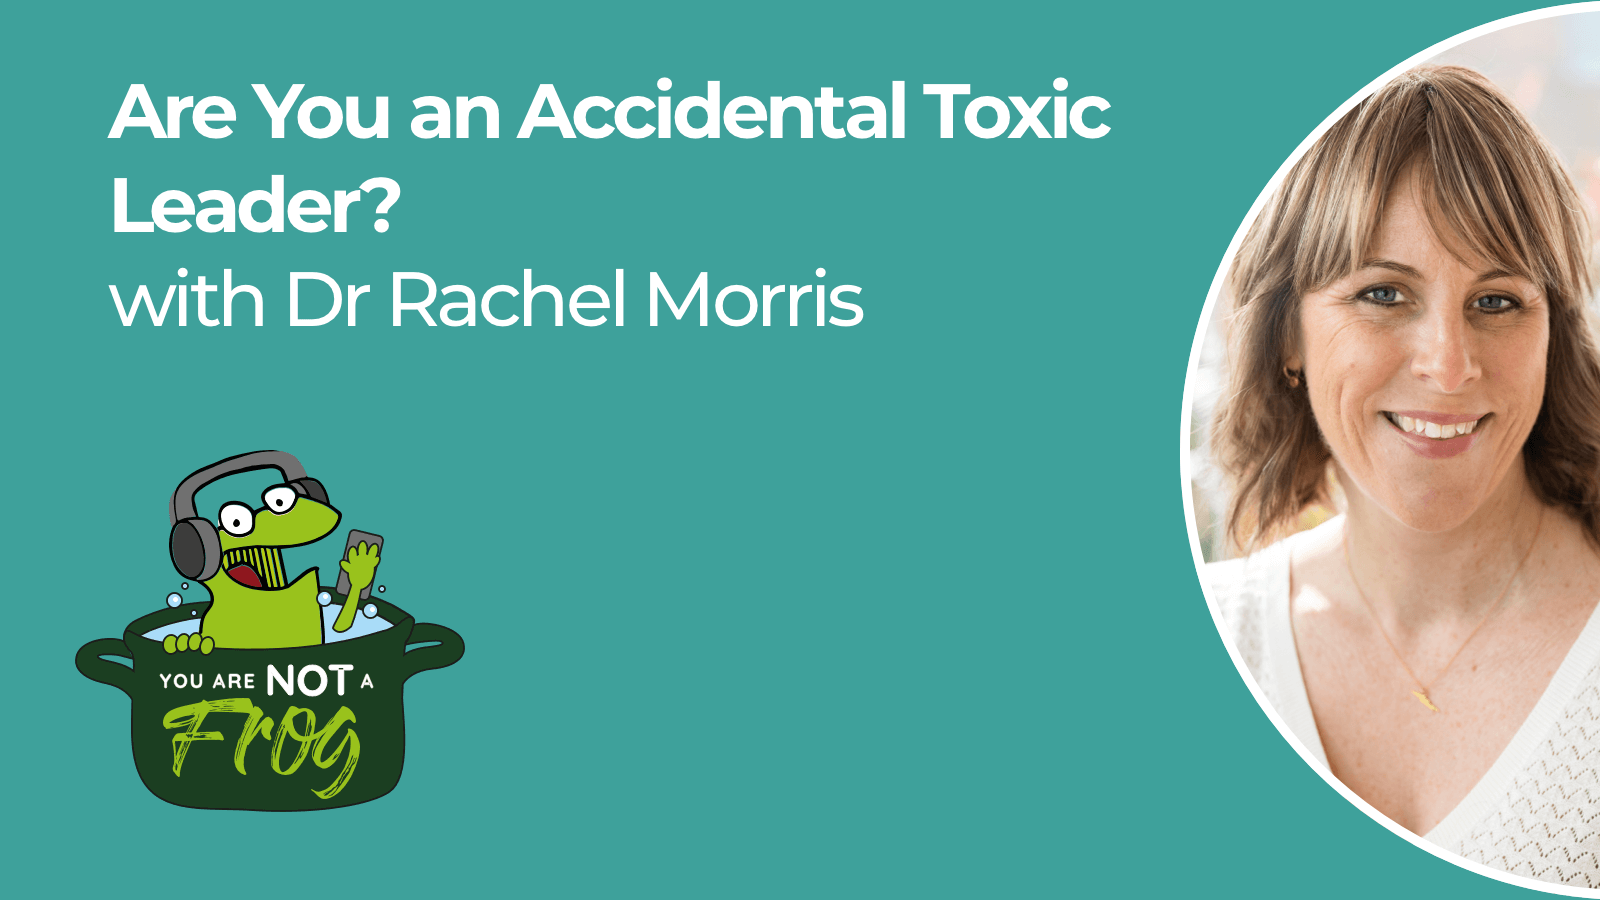 Are You an Accidental Toxic Leader?